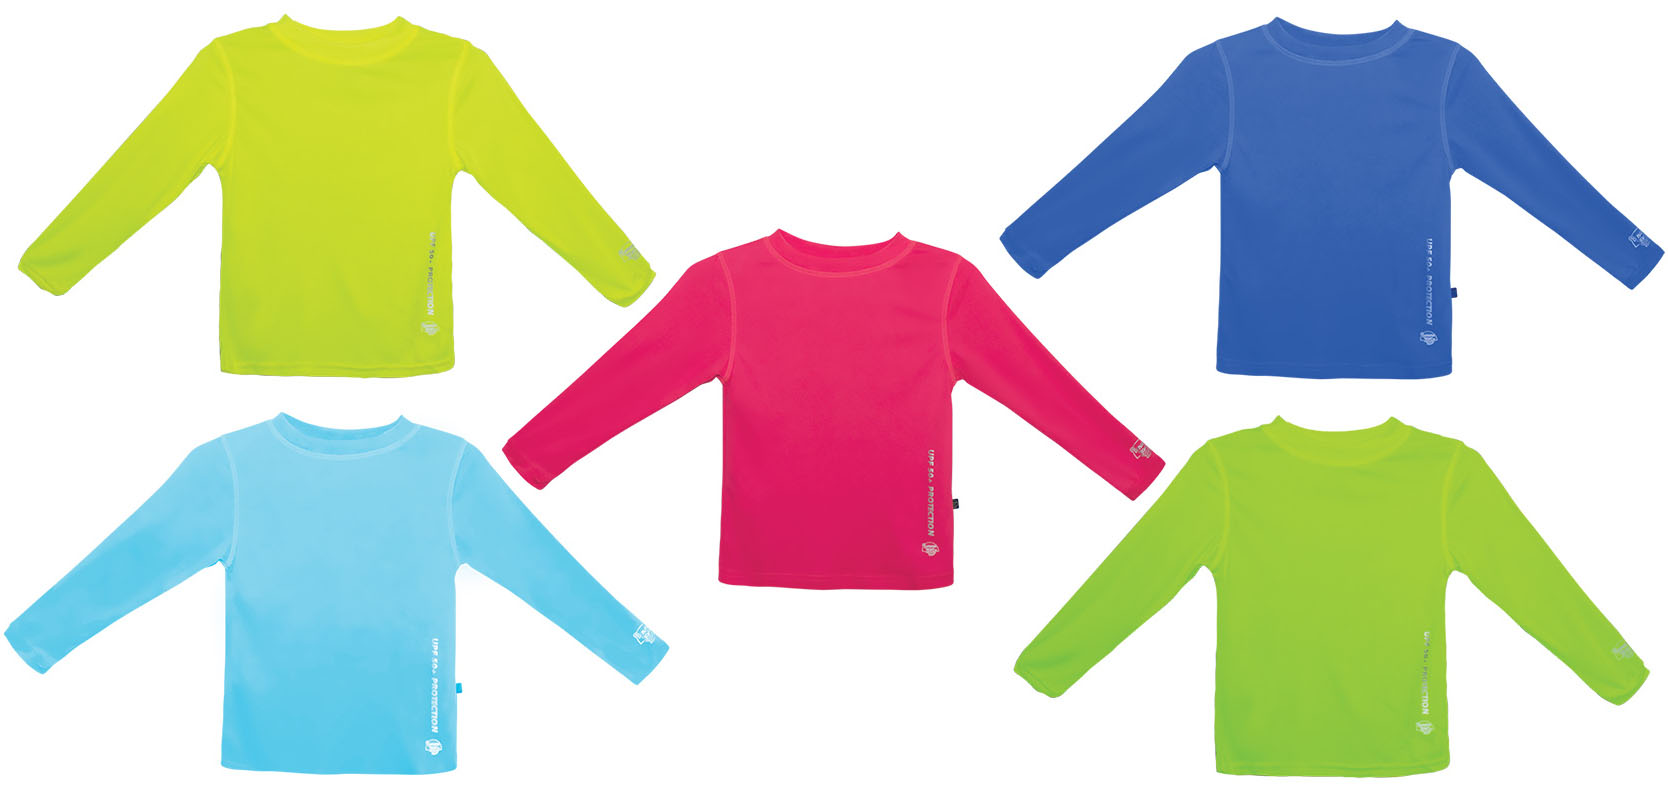 Toddler Girl's Fashion Long Sleeved Rash Guards - ASSORTED Colors - Sizes 2T-4T